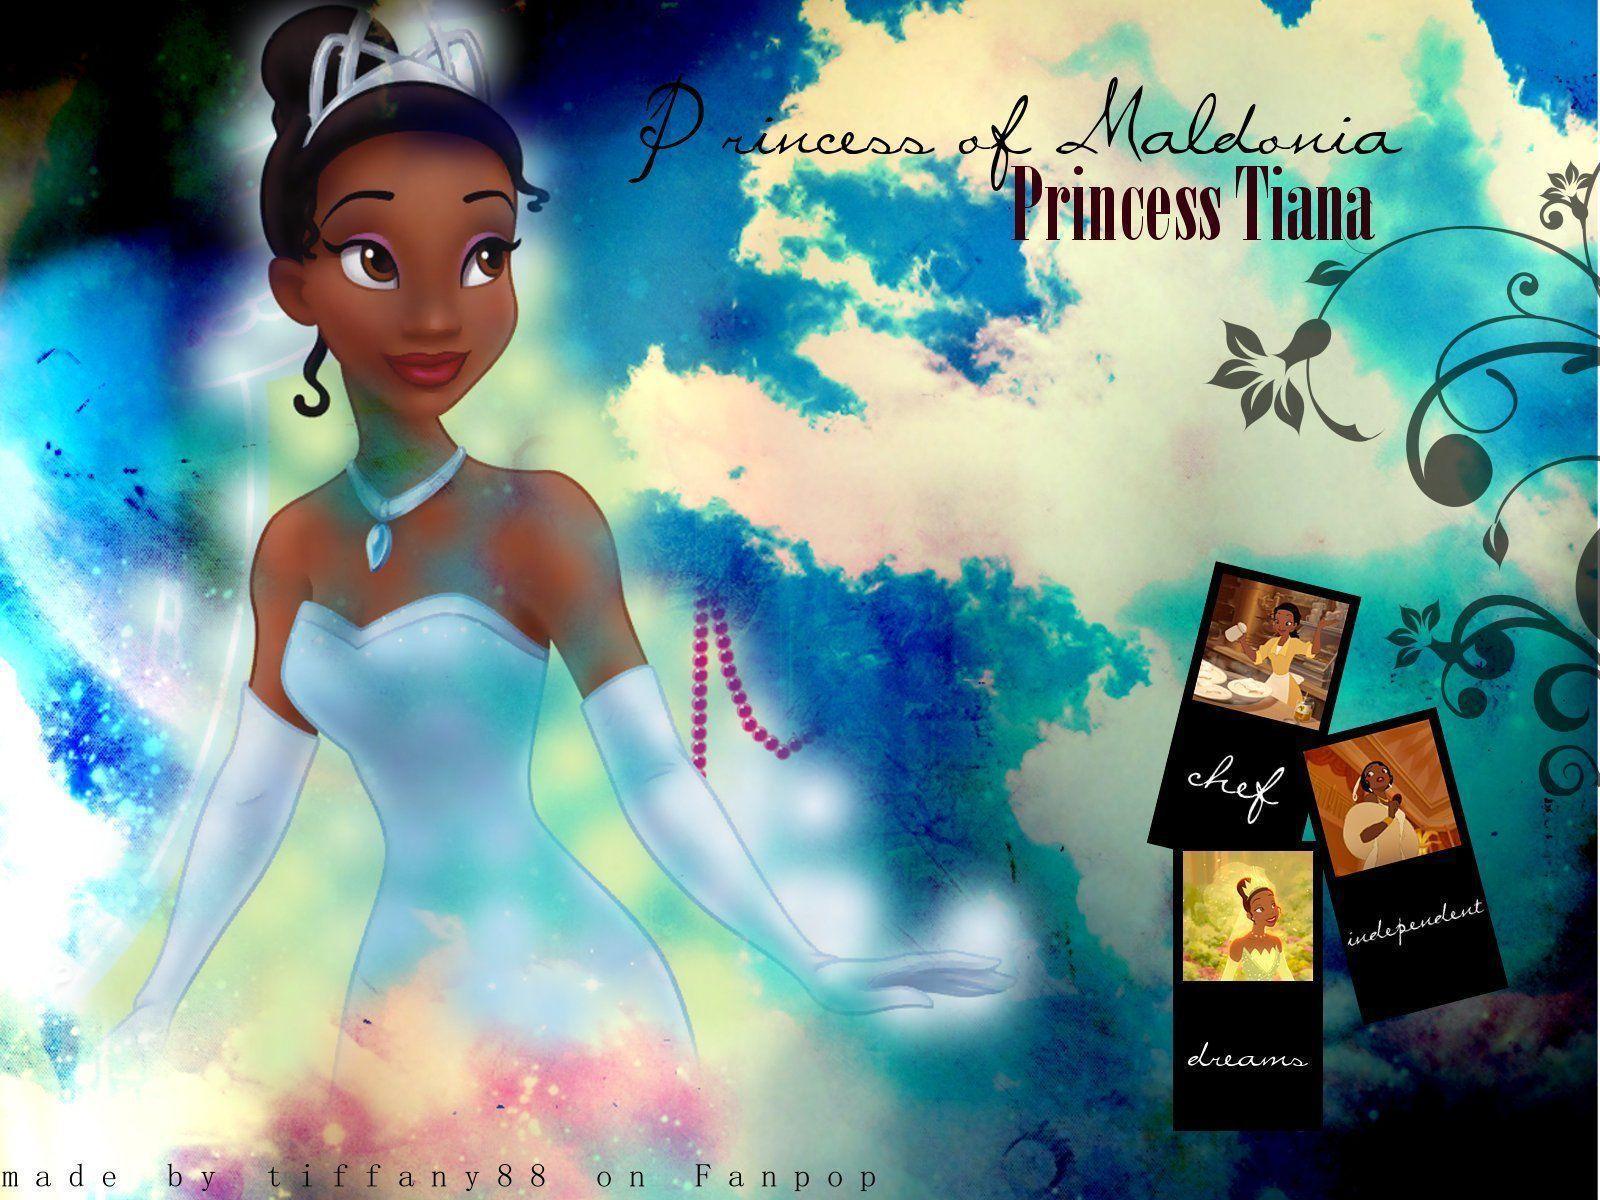 The Princess and the Frog Full HD Wallpaper for Nexus 6